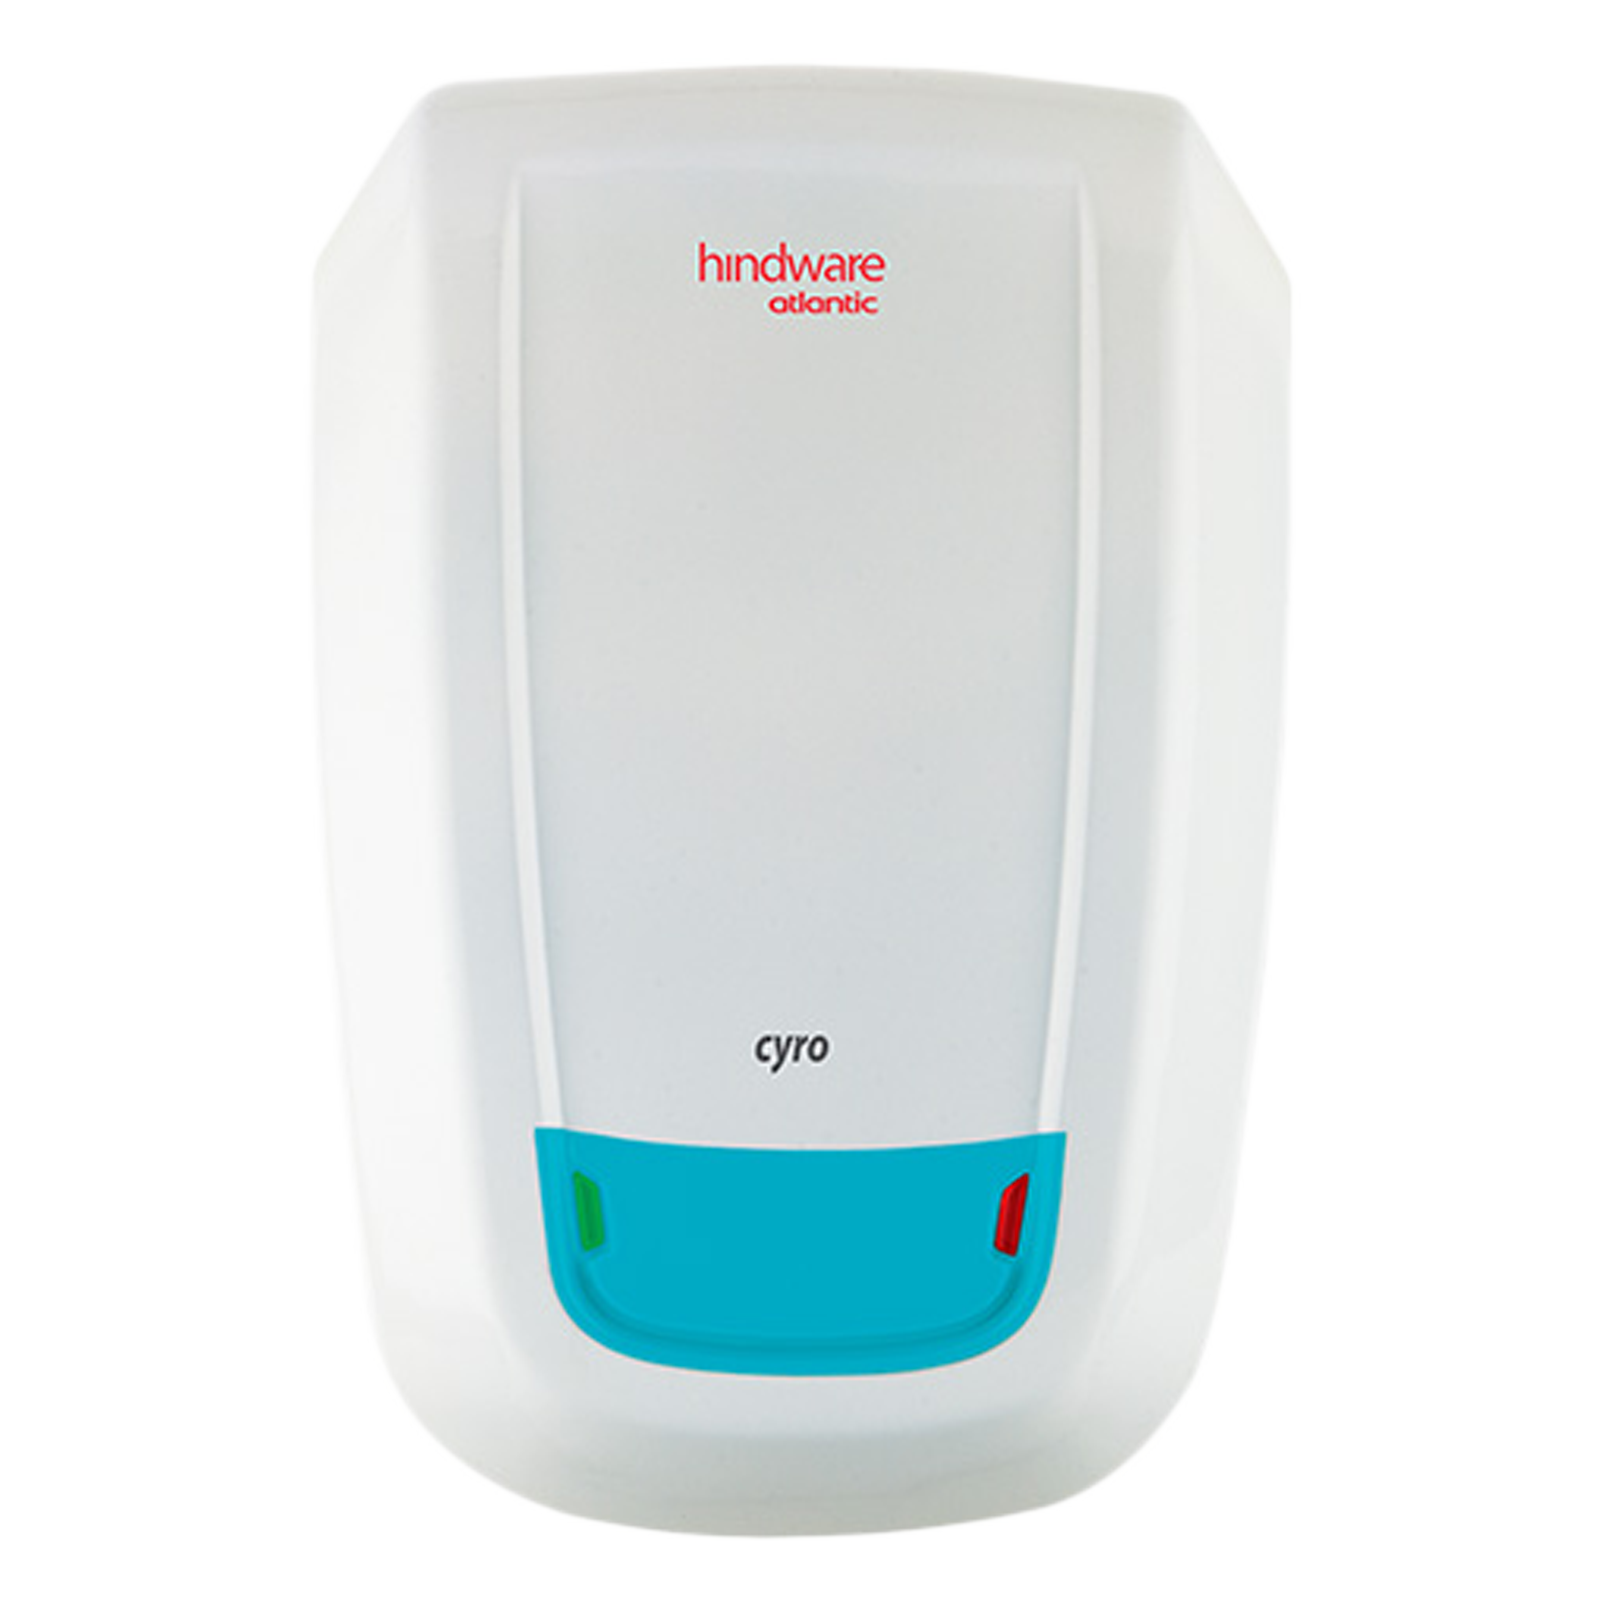 hindware Atlantic Cyro 3 Litres Instant Water Heater (3000 Watts, 521715, White)